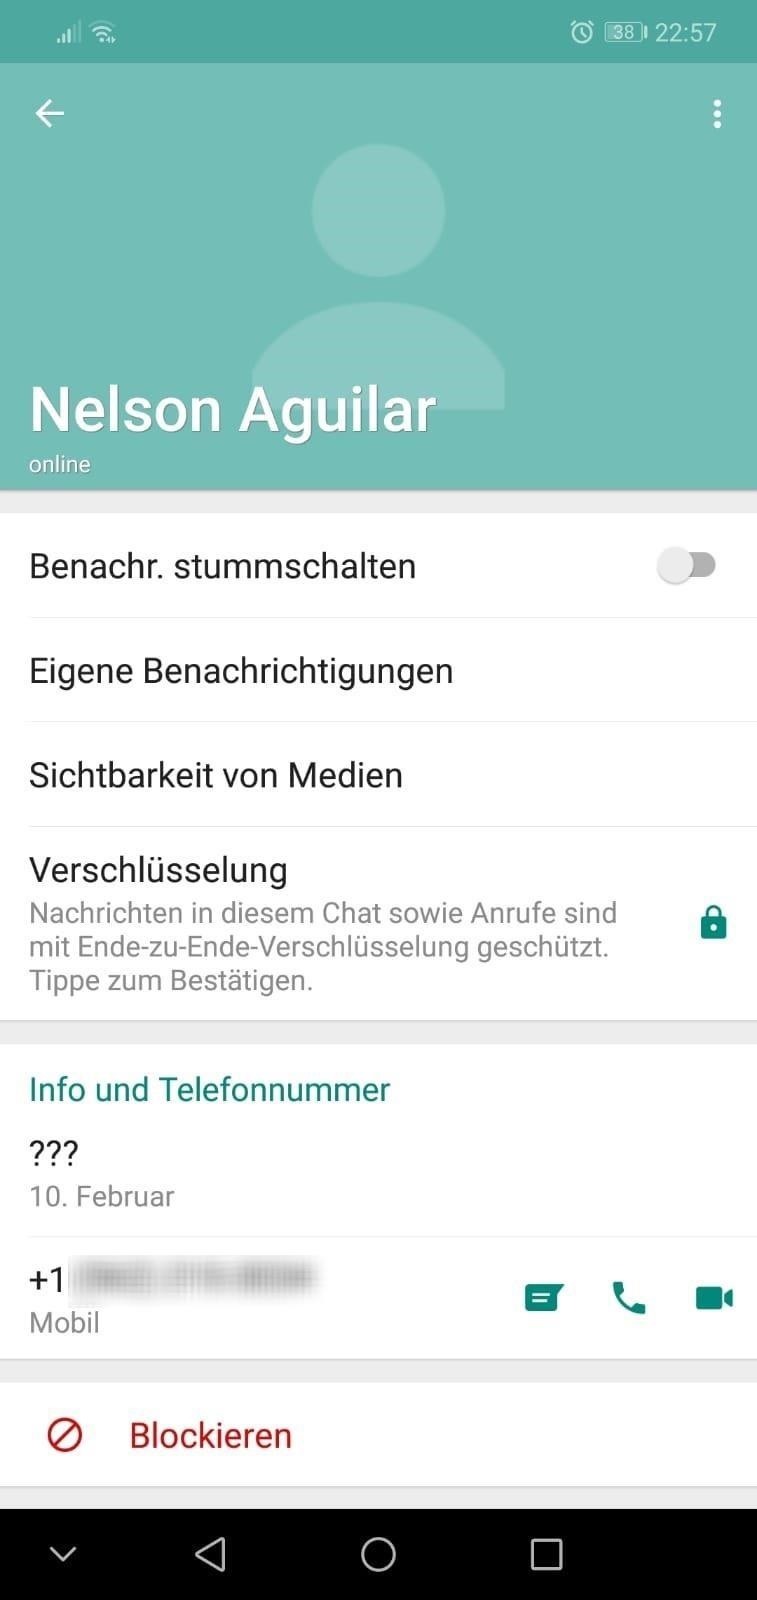 How to Hide Your WhatsApp Profile Photo So Other Users Can